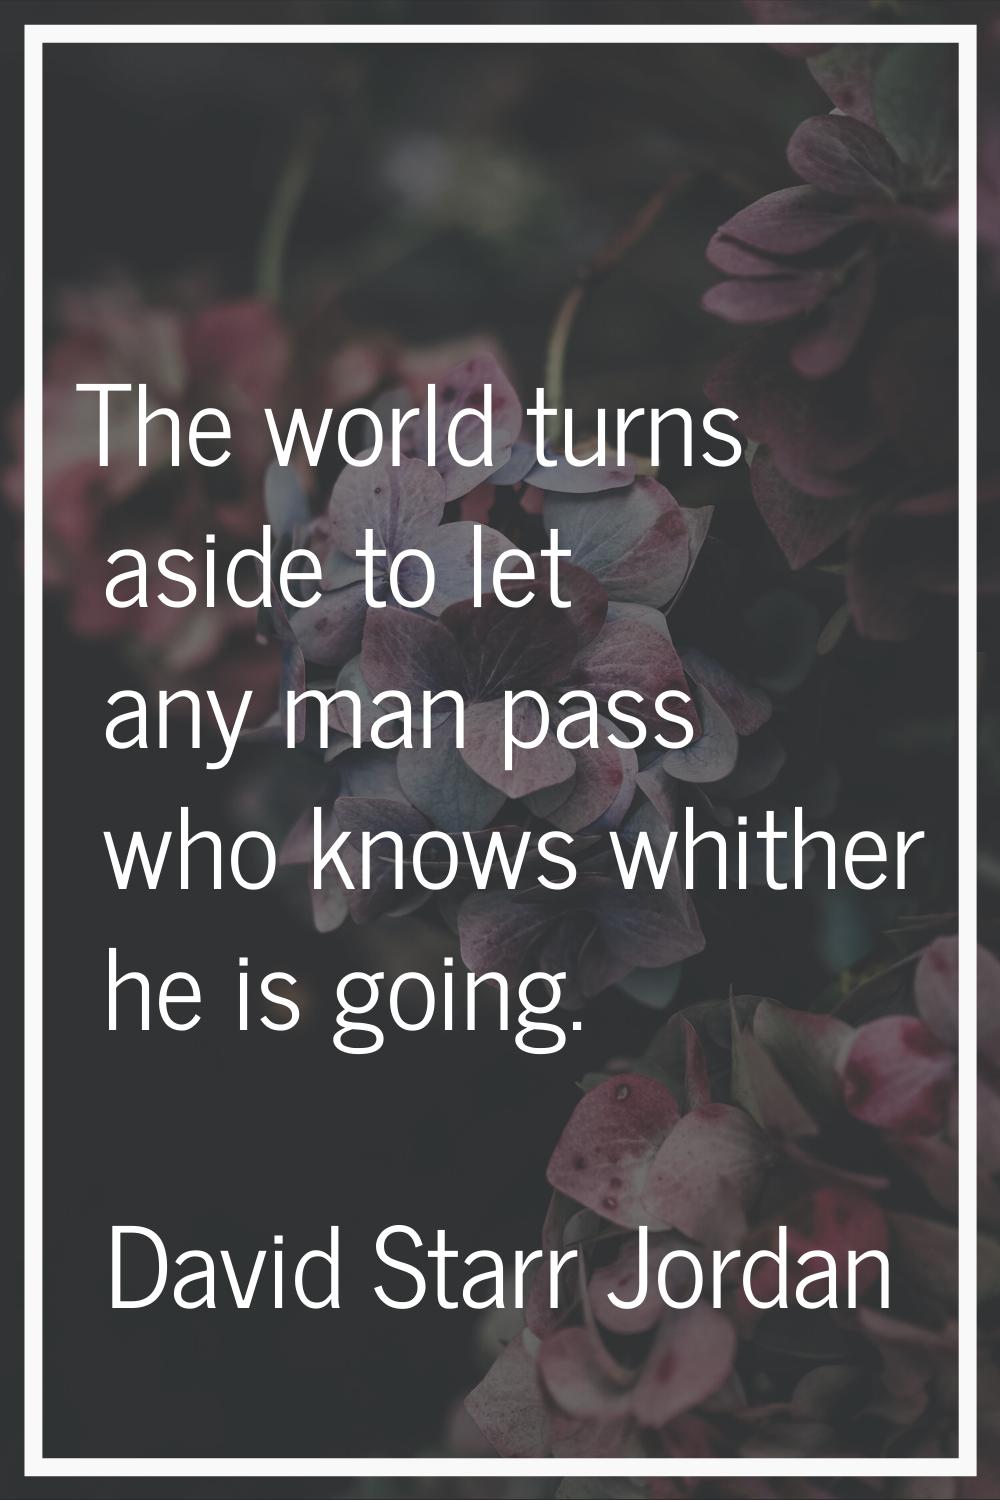 The world turns aside to let any man pass who knows whither he is going.